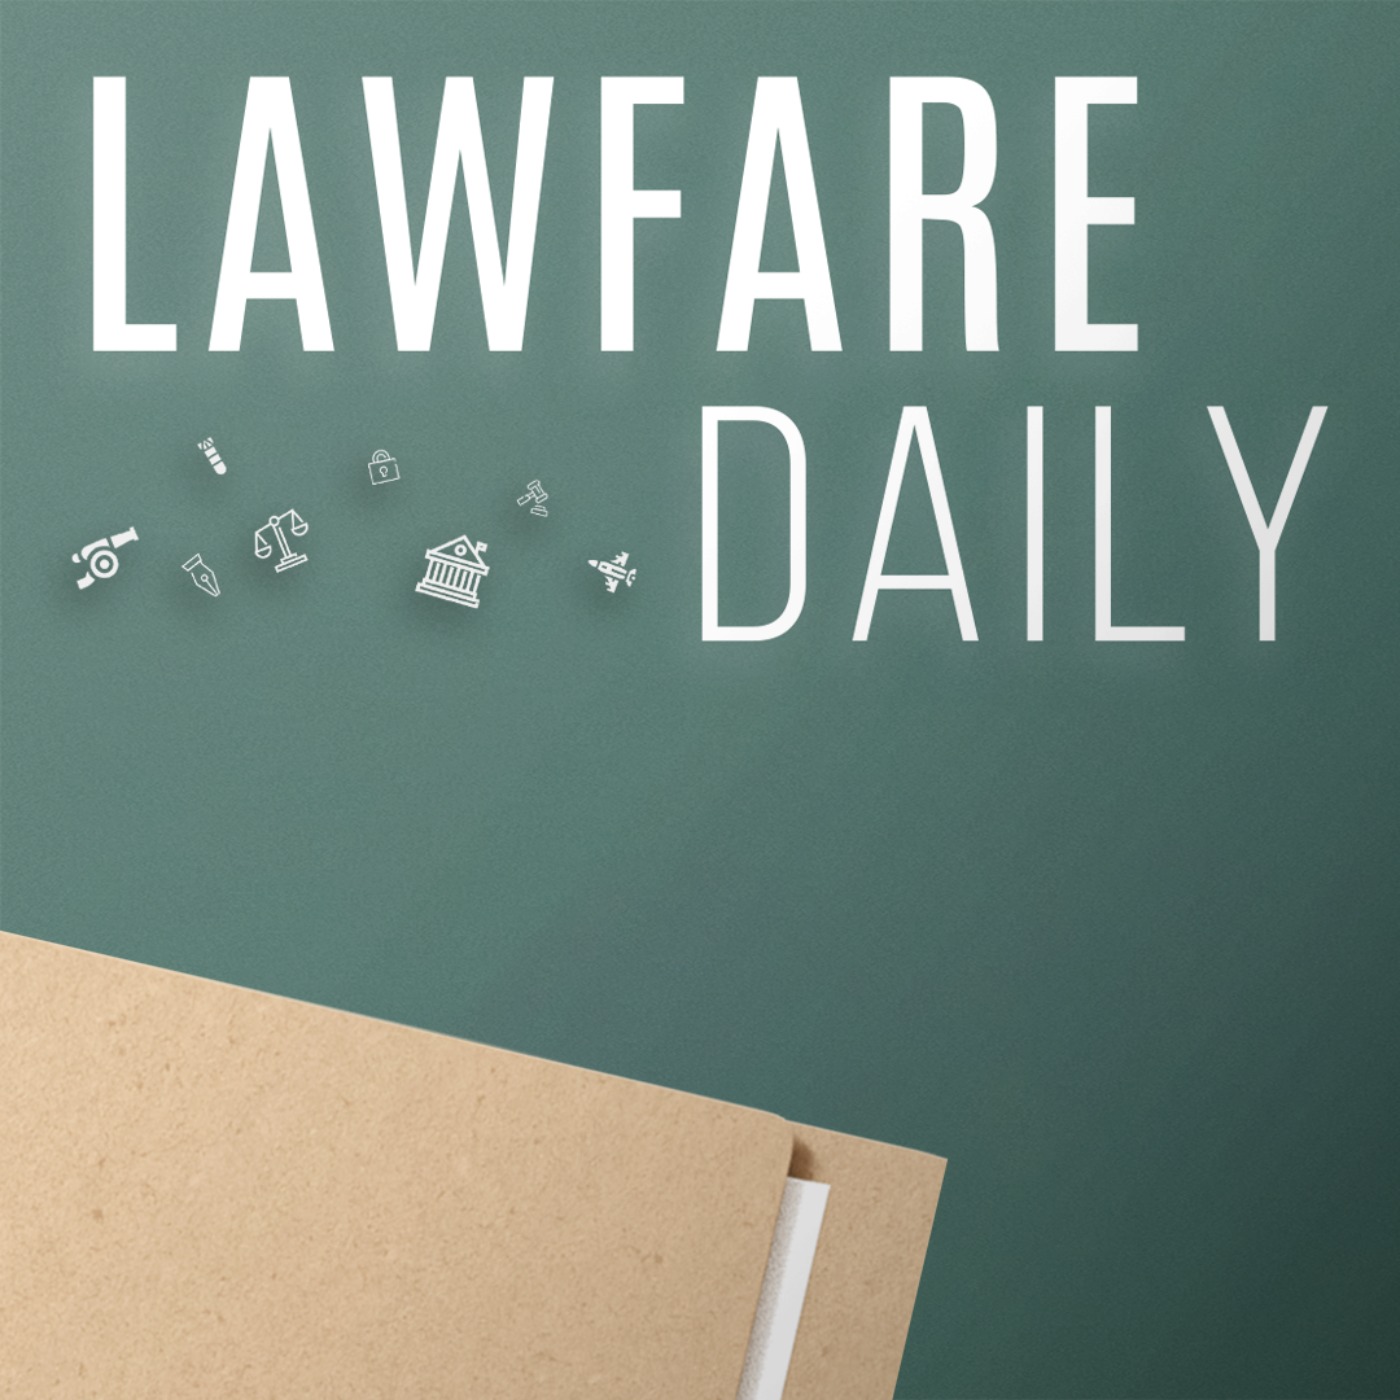 Lawfare Daily: The Case for a U.S. Cyber Force